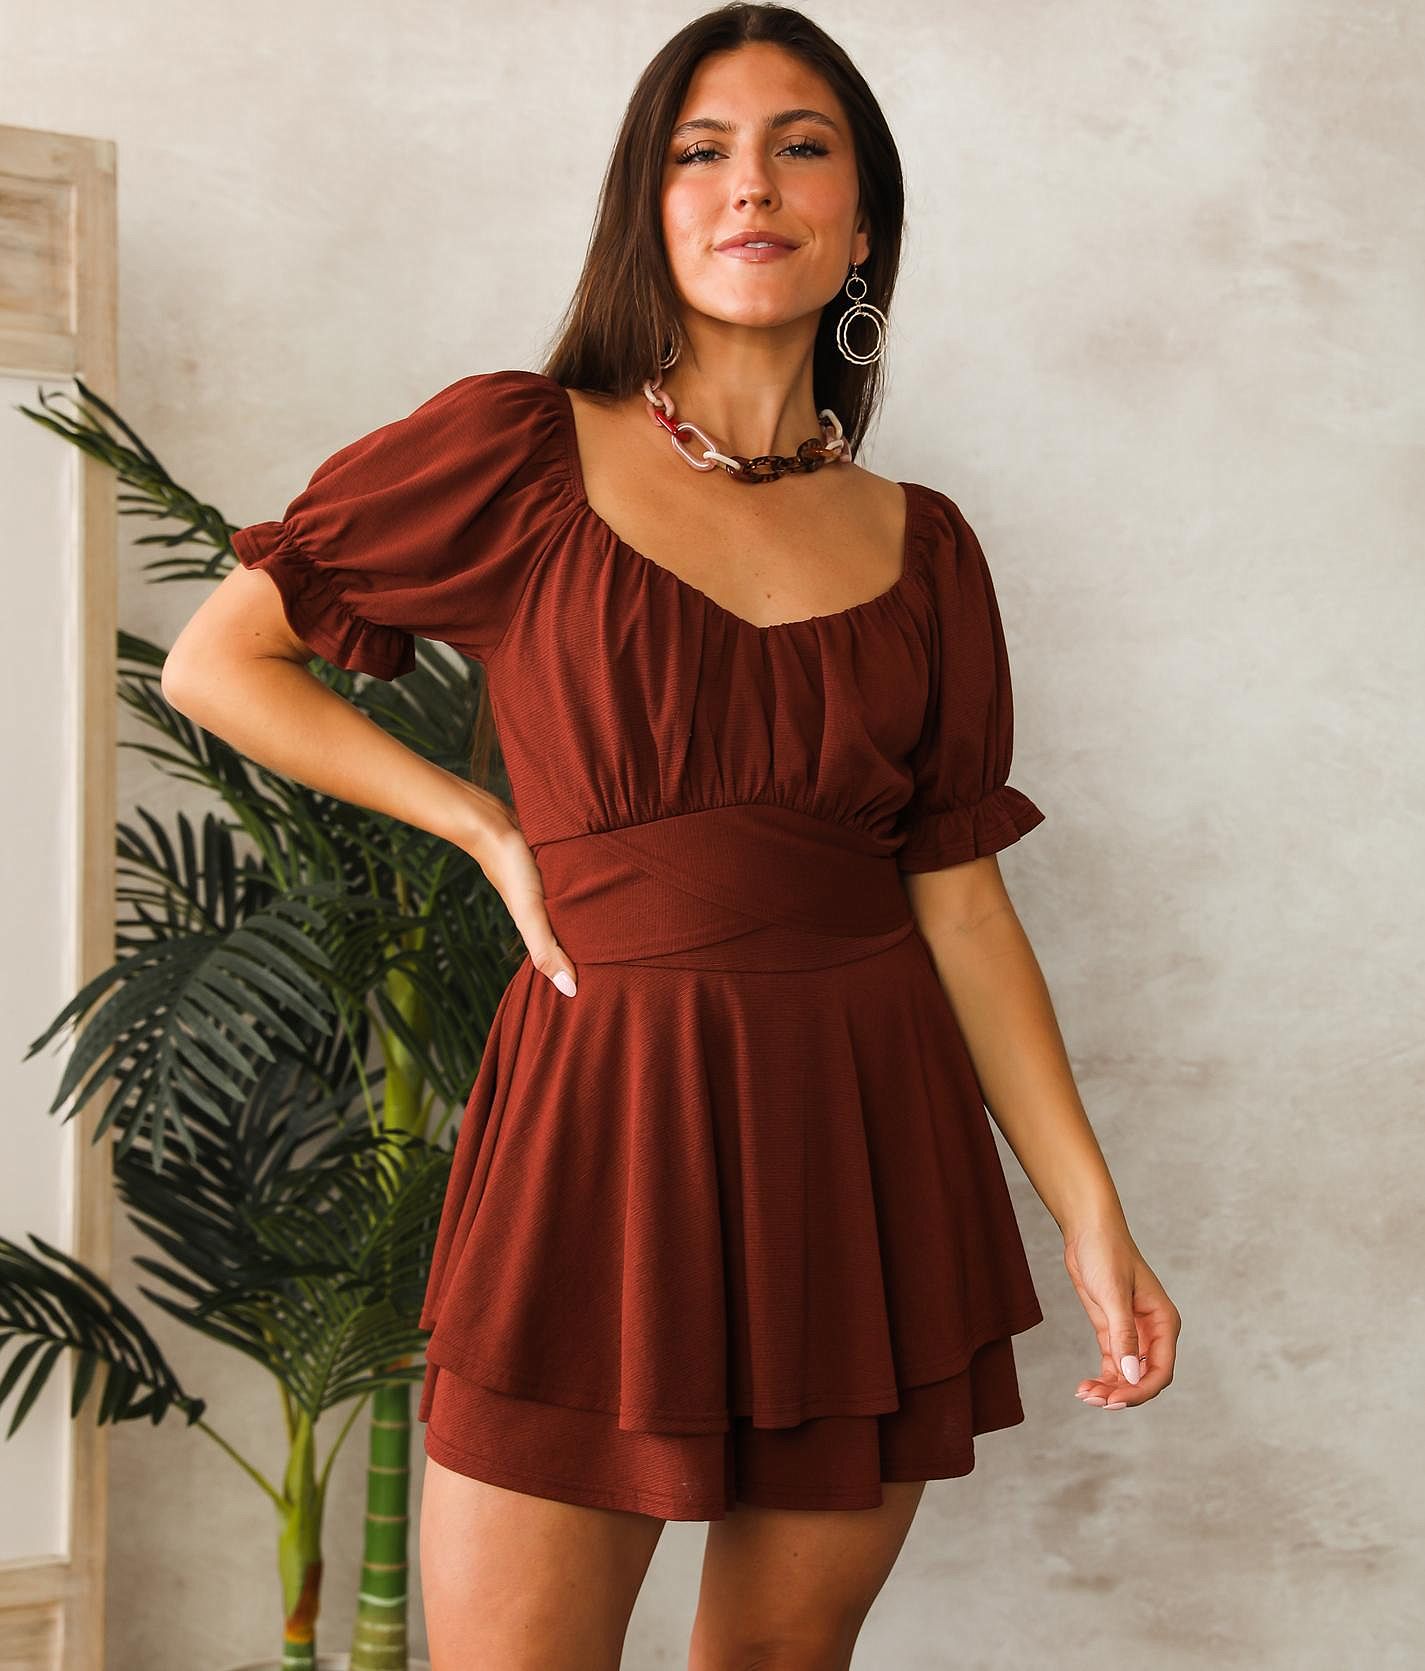 Willow & Root Ruffle Romper - Women's Rompers/Jumpsuits in Madder Brown | Buckle